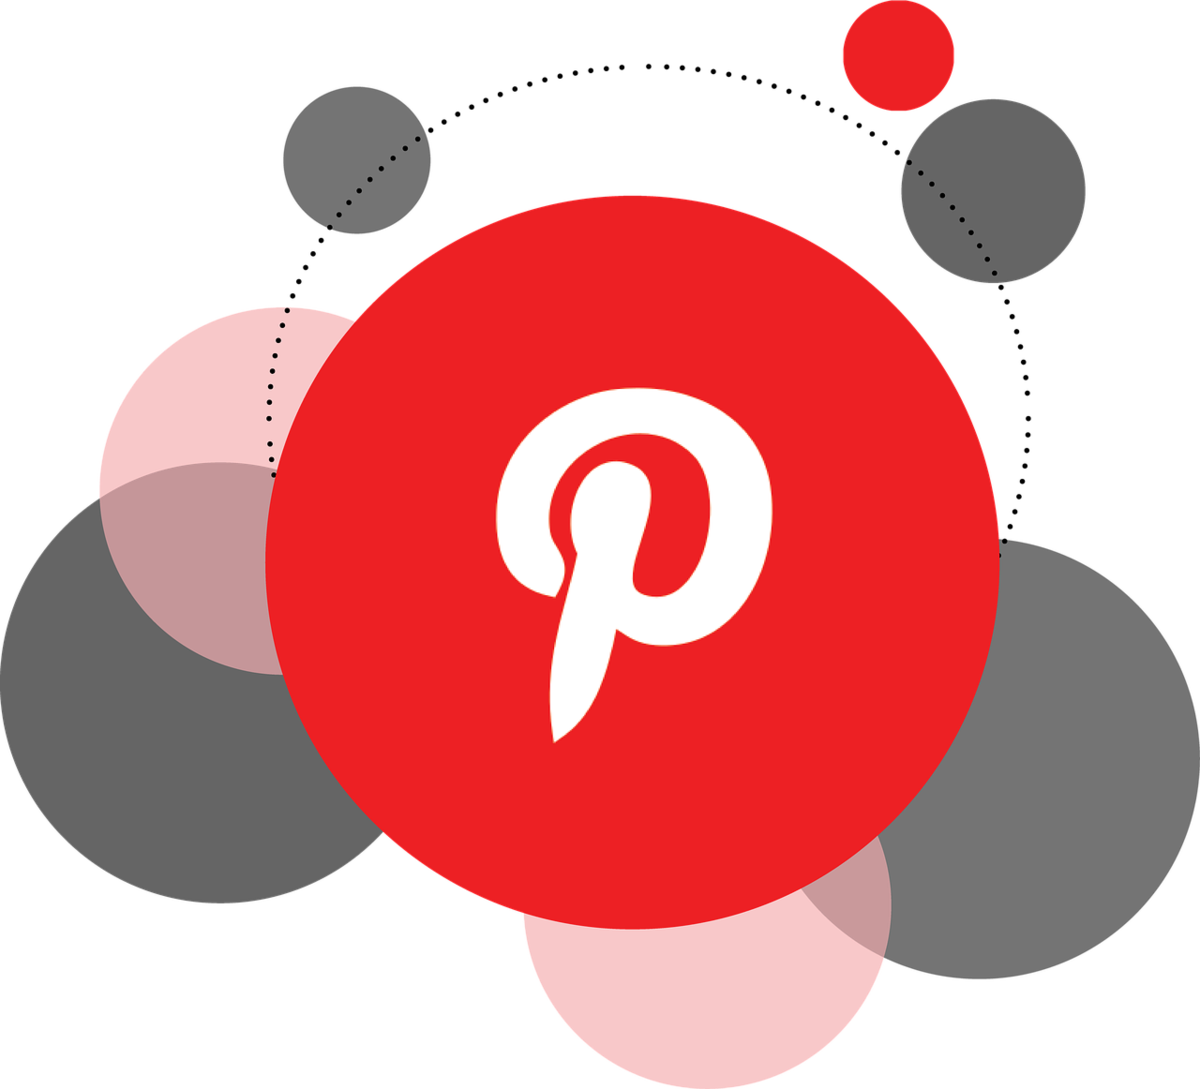 Feature Your Best Pins On Your Profile With New Pinterest Profile Design